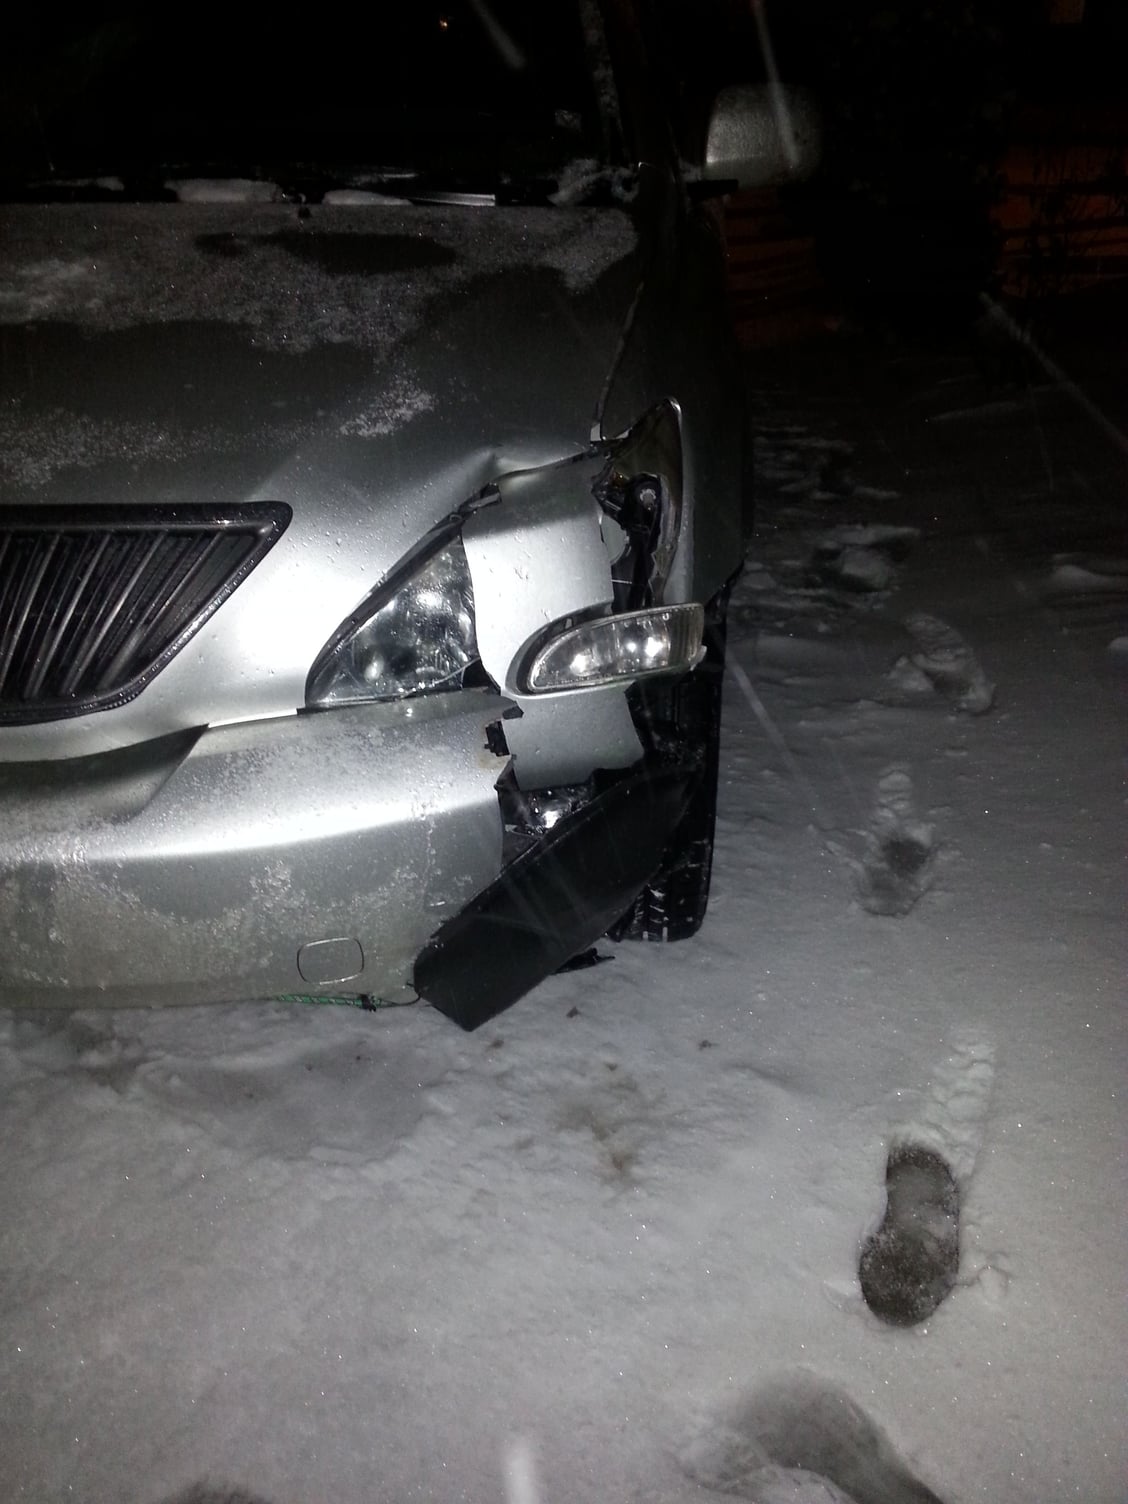 bumper cost damage repair included clublexus lexus headlight much smashed